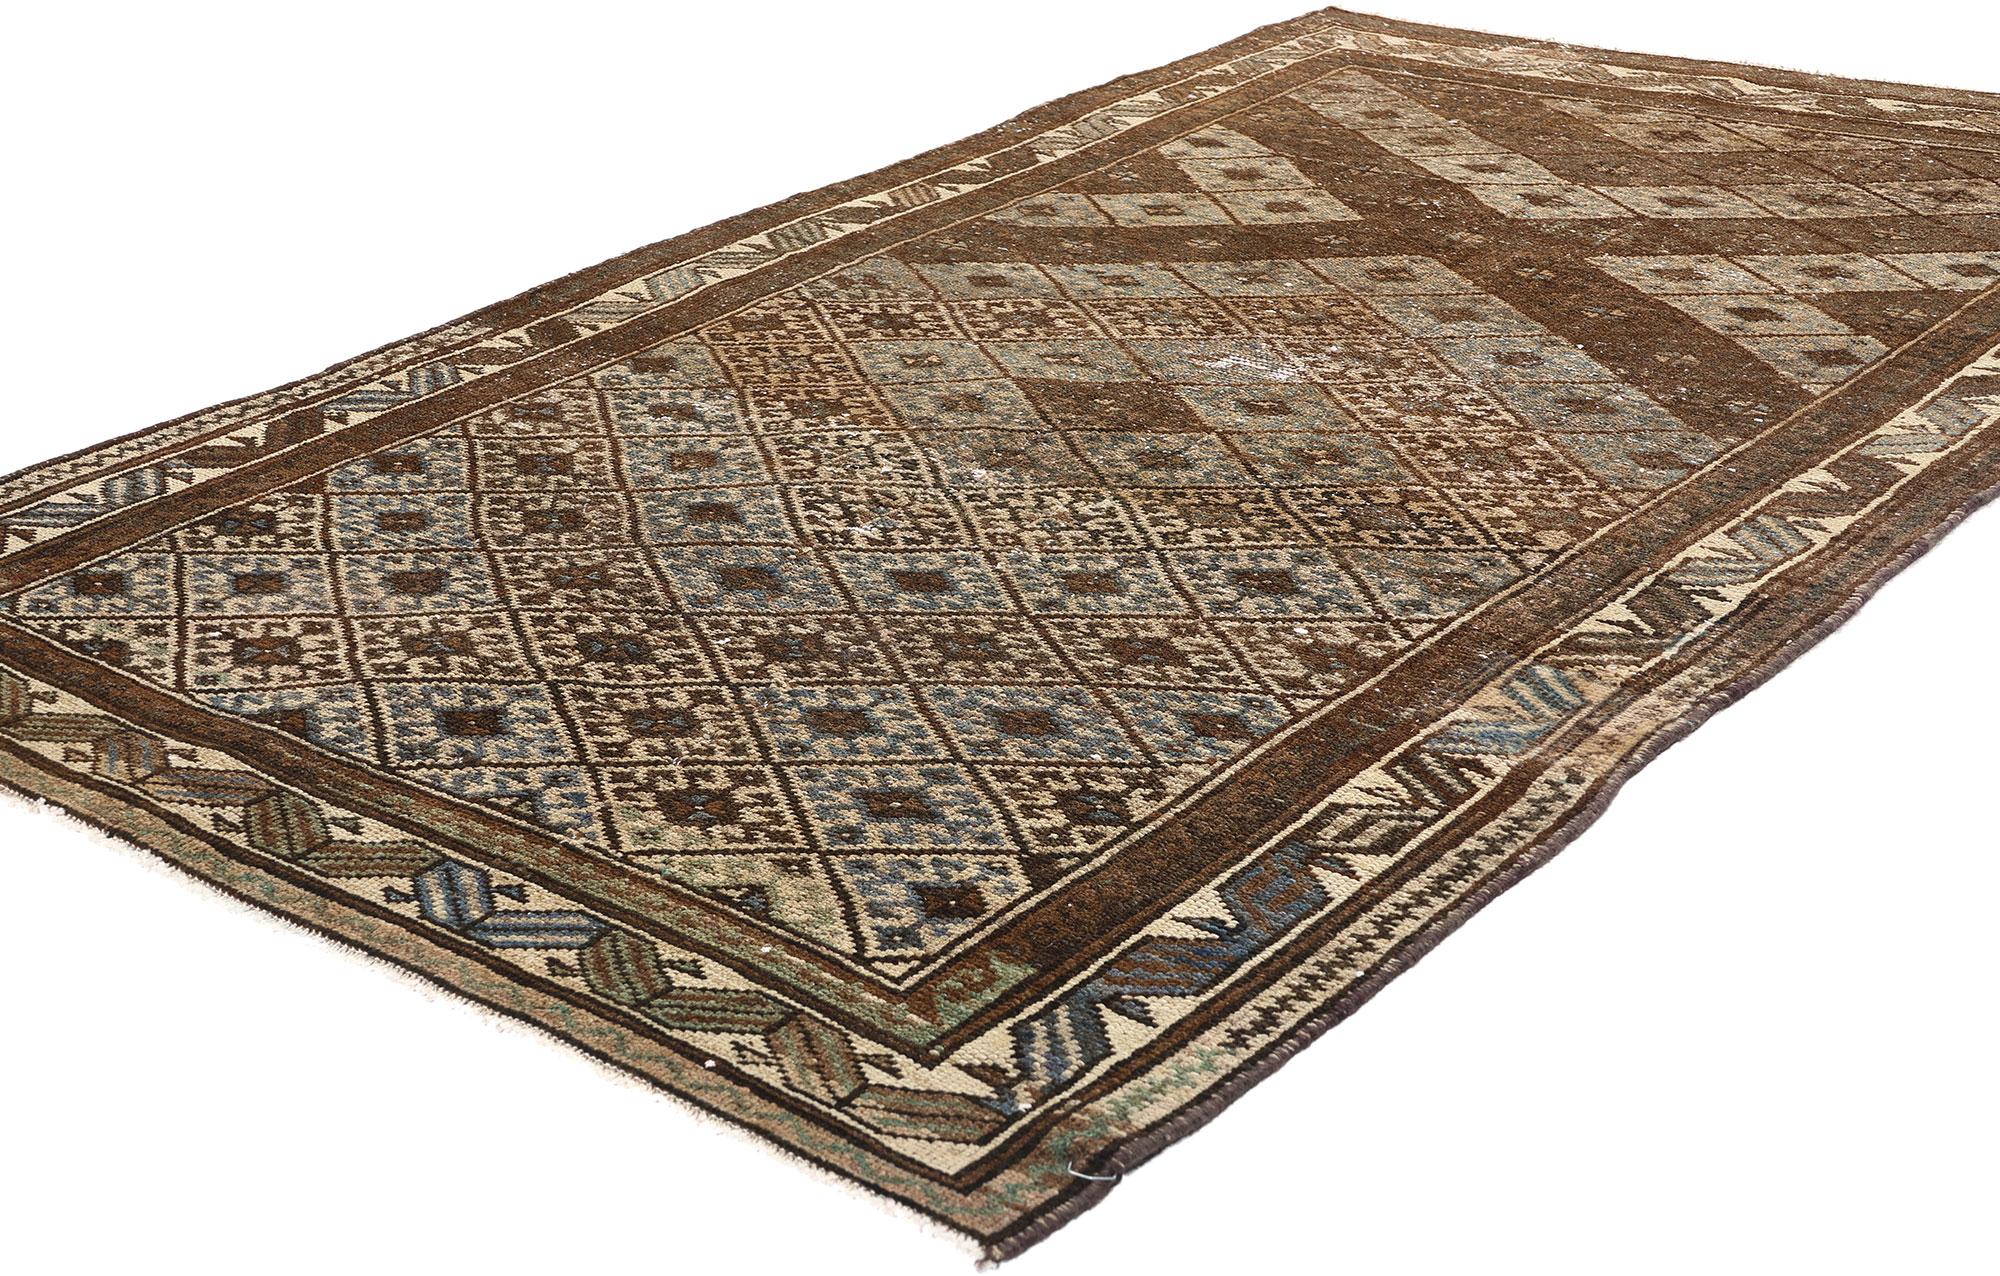 61016 Antique-Worn Persian Hamadan Rug, 04'02 x 07'00. Distressed antique-washed Hamadan rugs are authentic Persian rugs, originating from the Hamadan region in Iran, that have undergone a deliberate process to create a weathered or worn appearance,